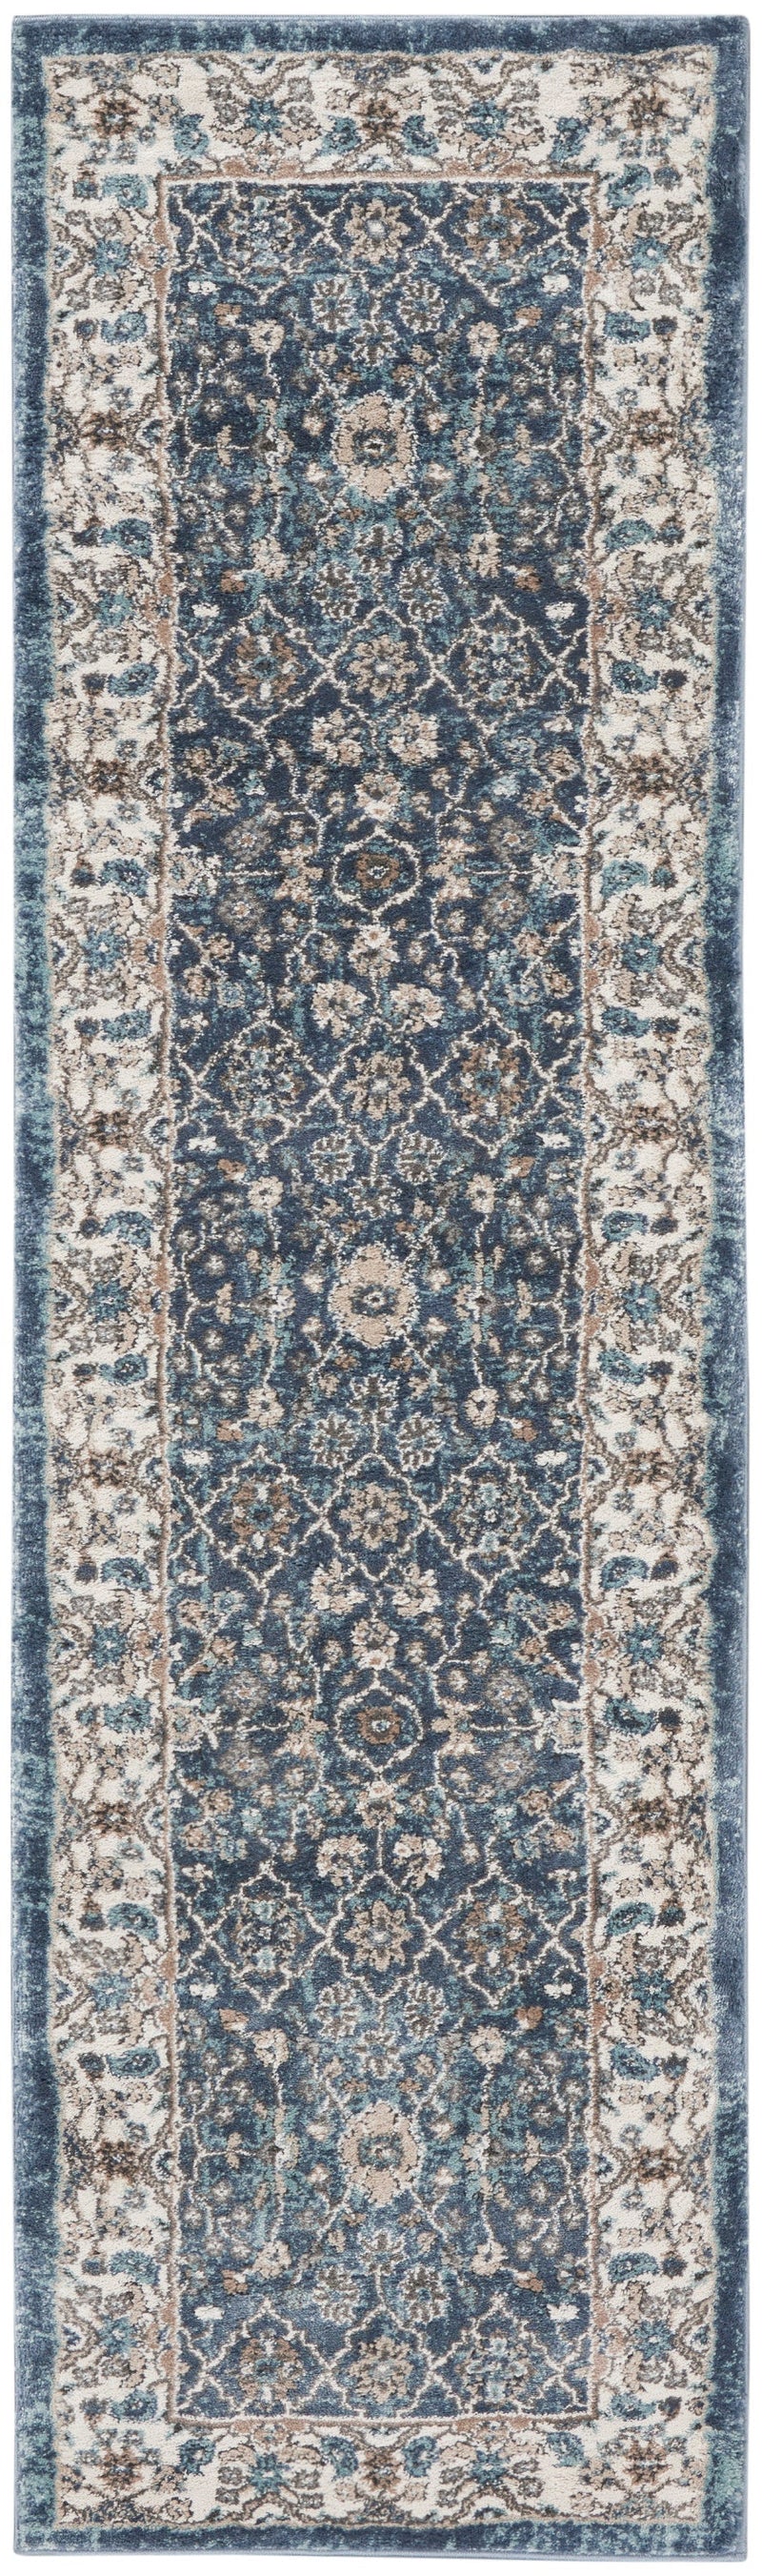 media image for american manor blue ivory rug by nourison 99446882905 redo 2 224